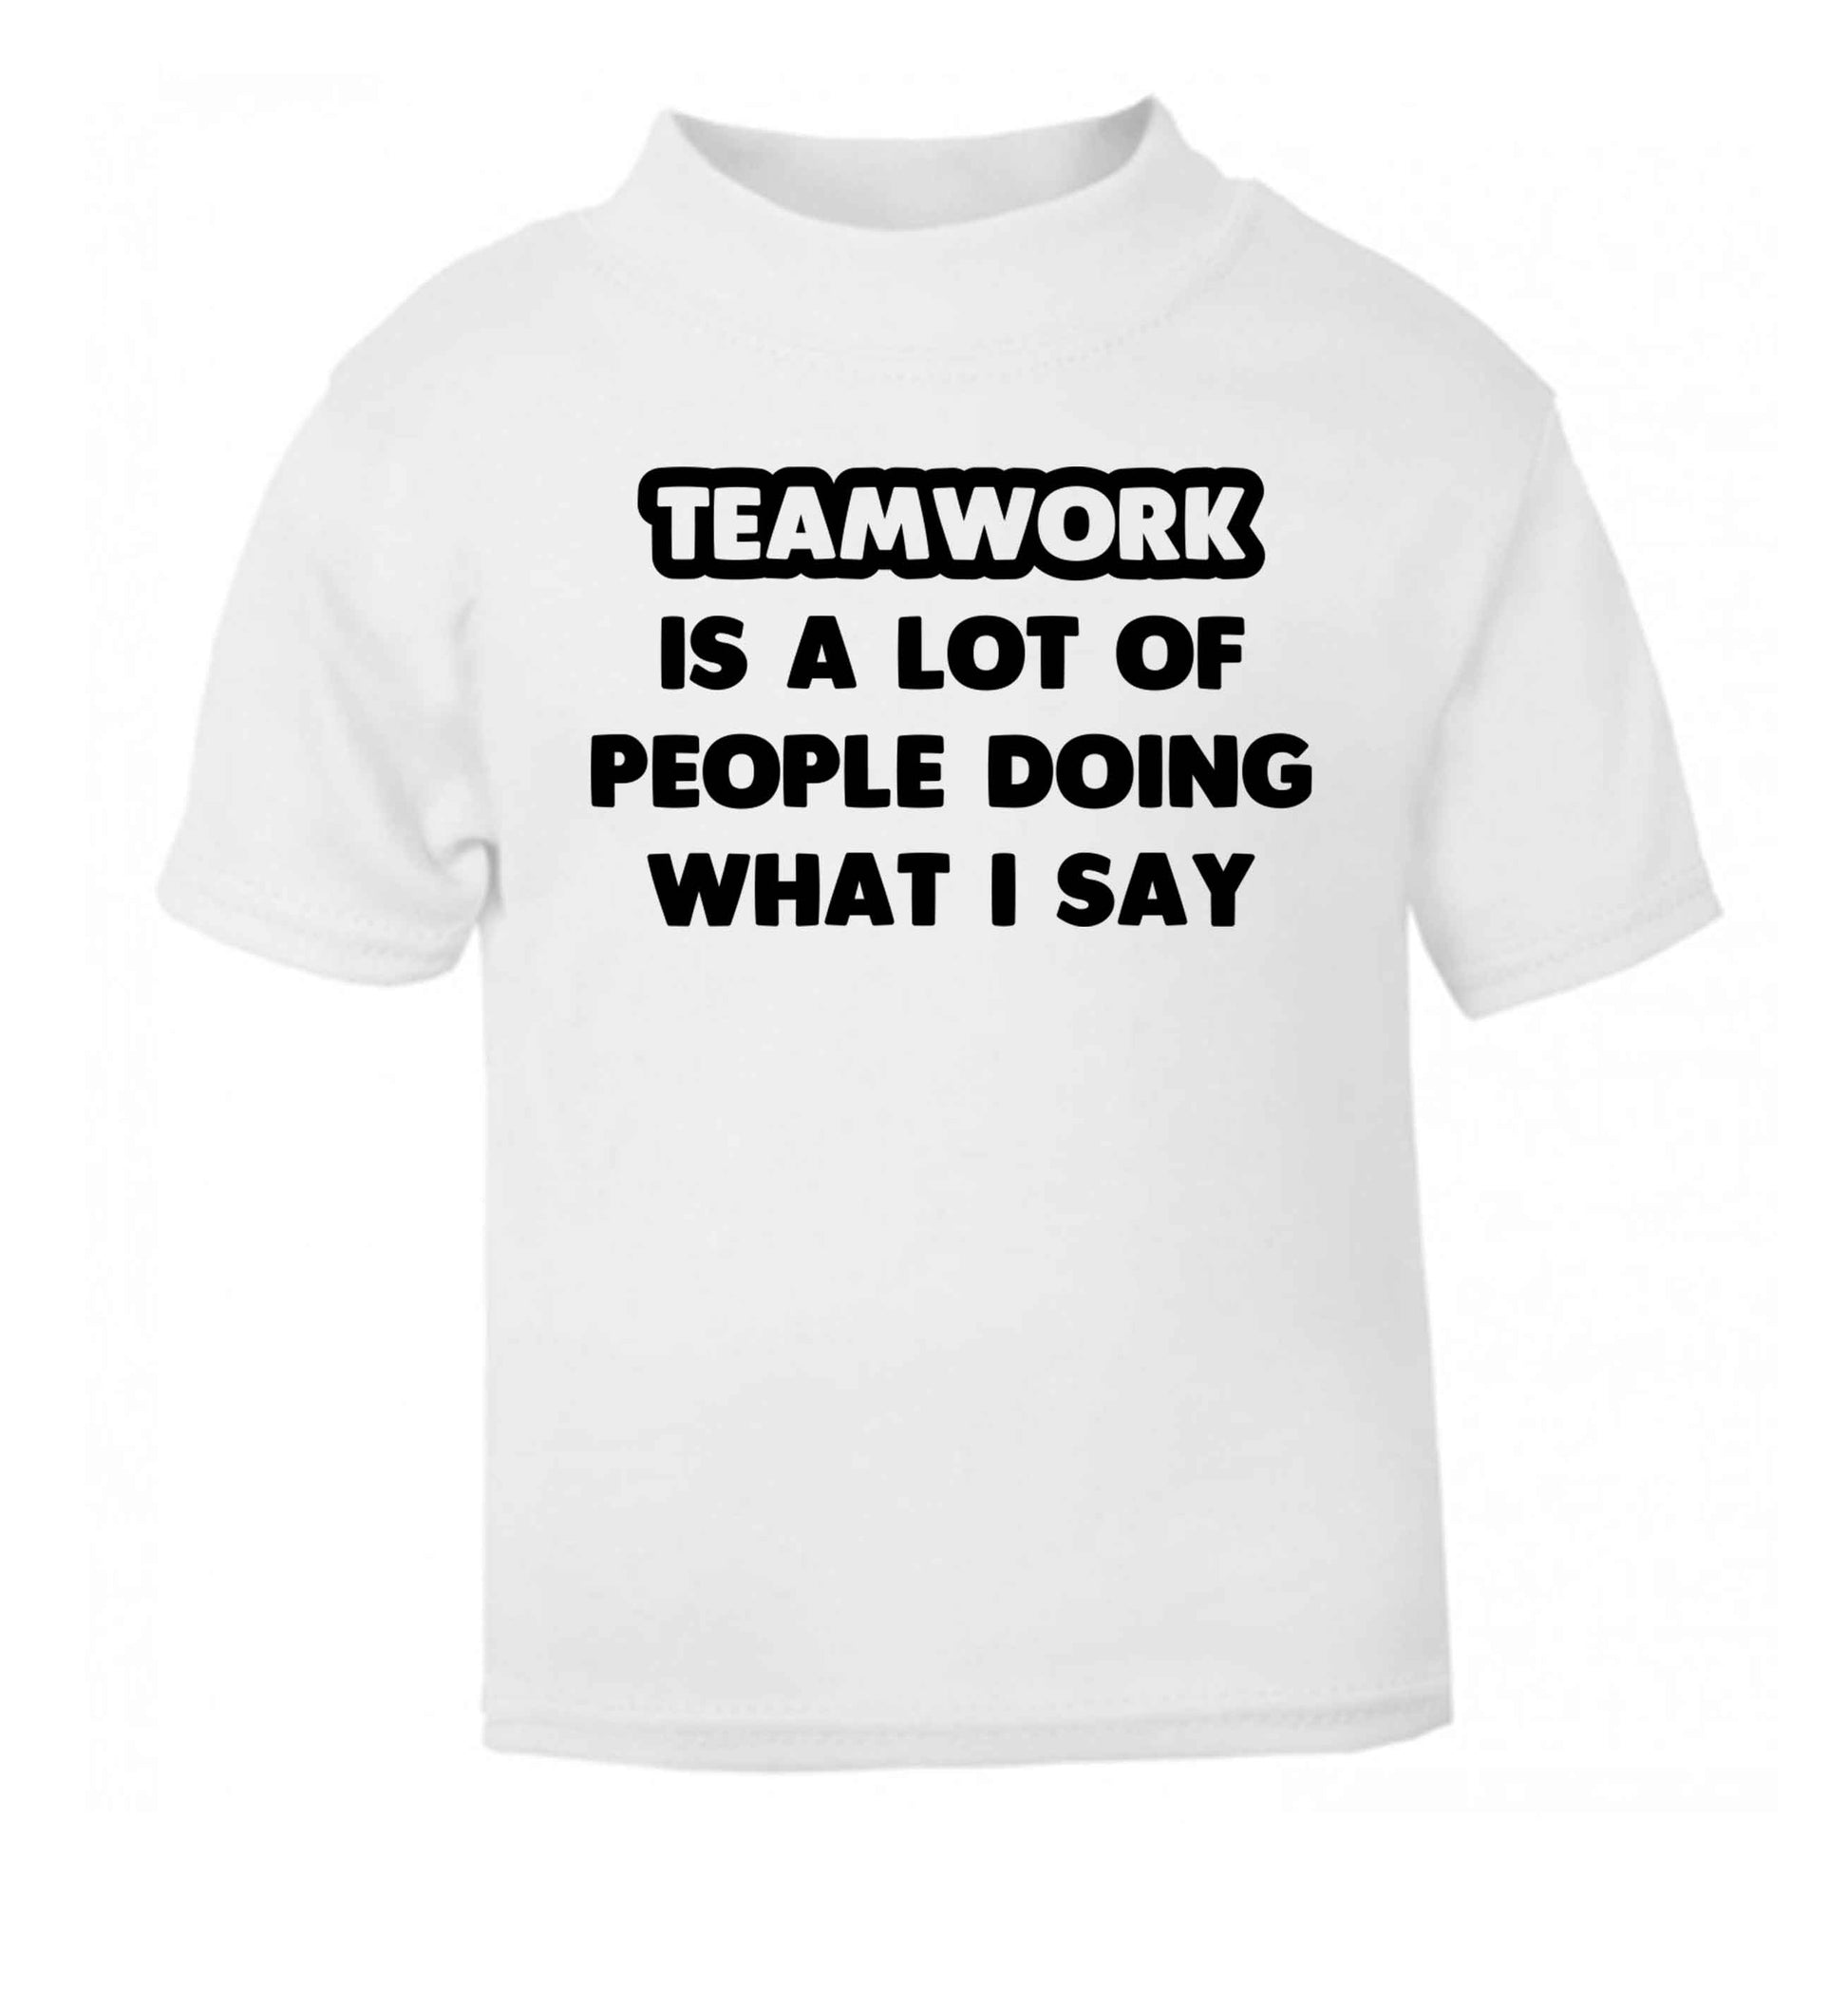 Teamwork is a lot of people doing what I say white Baby Toddler Tshirt 2 Years